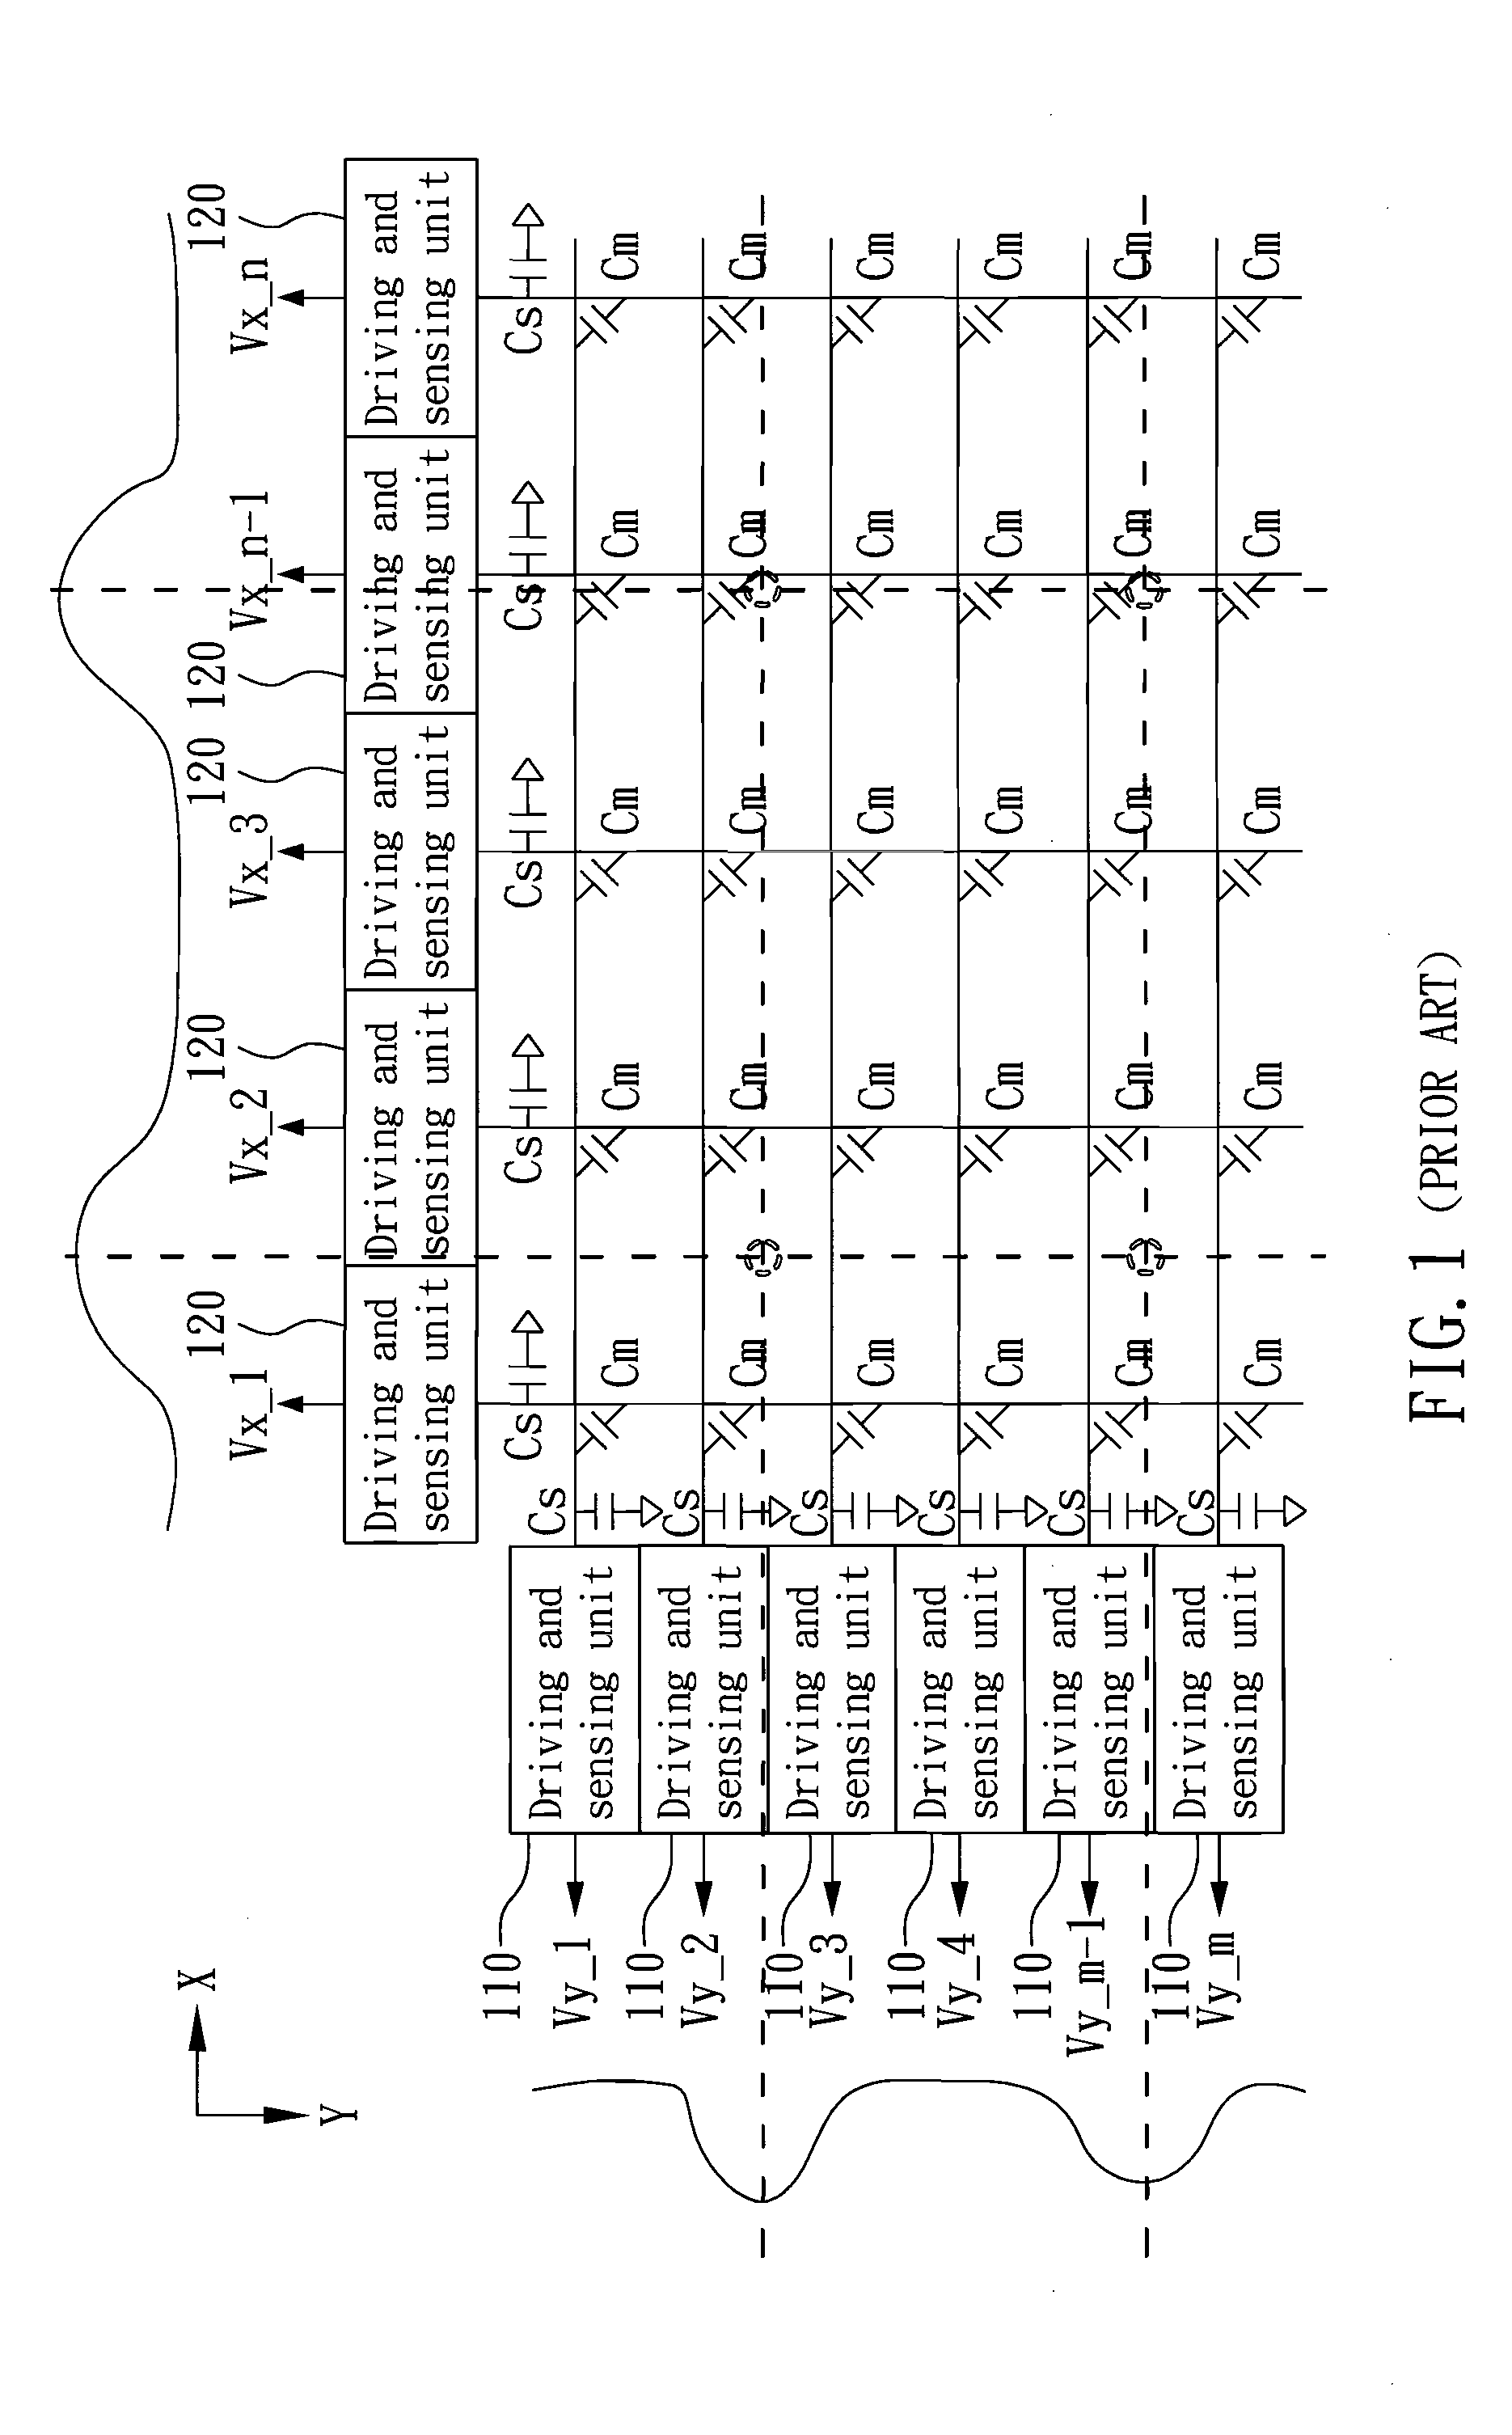 In-cell multi-touch display panel system